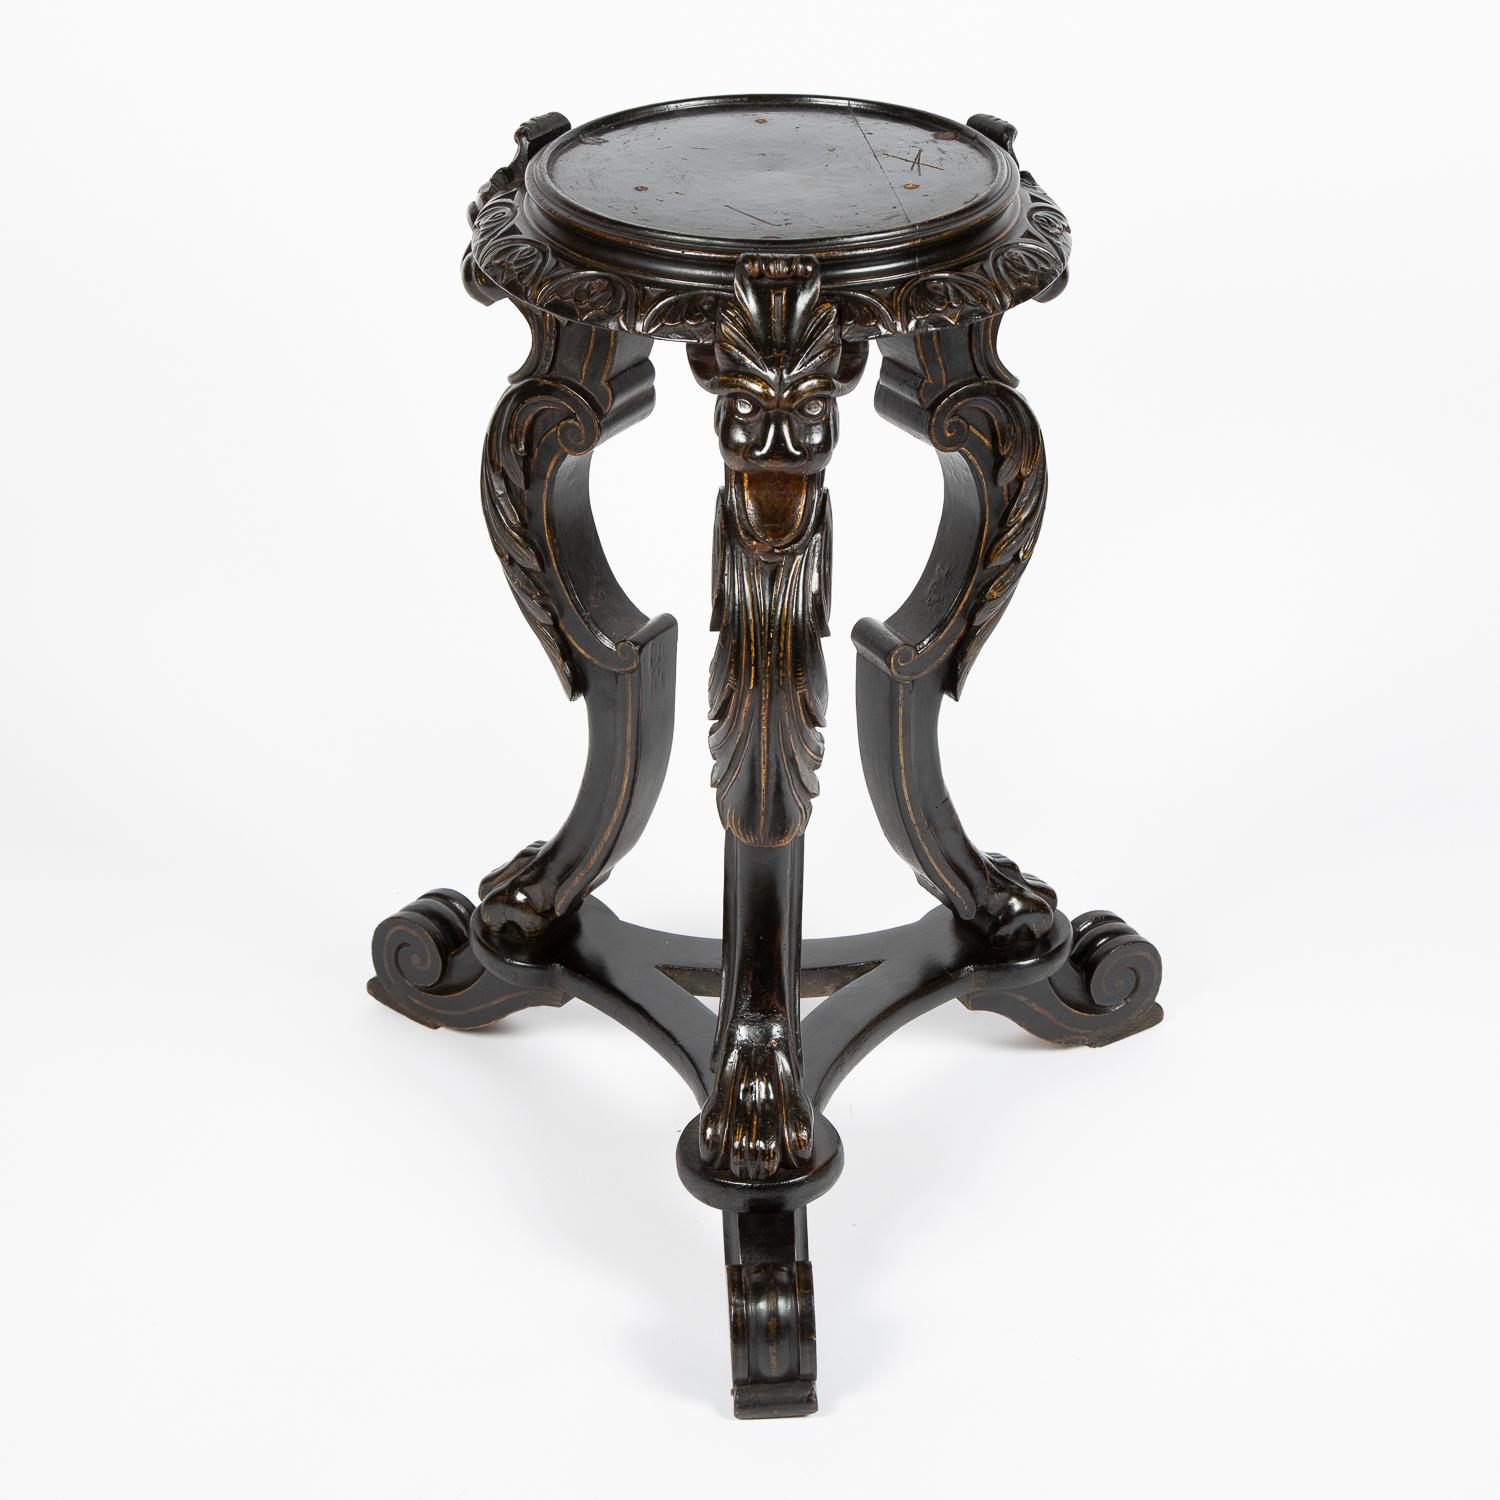 A pair of late 19th century ebonized tripod vase stands, carved with Griffins heads and floral motifs, retaining faint gilt highlights. English, circa 1880.